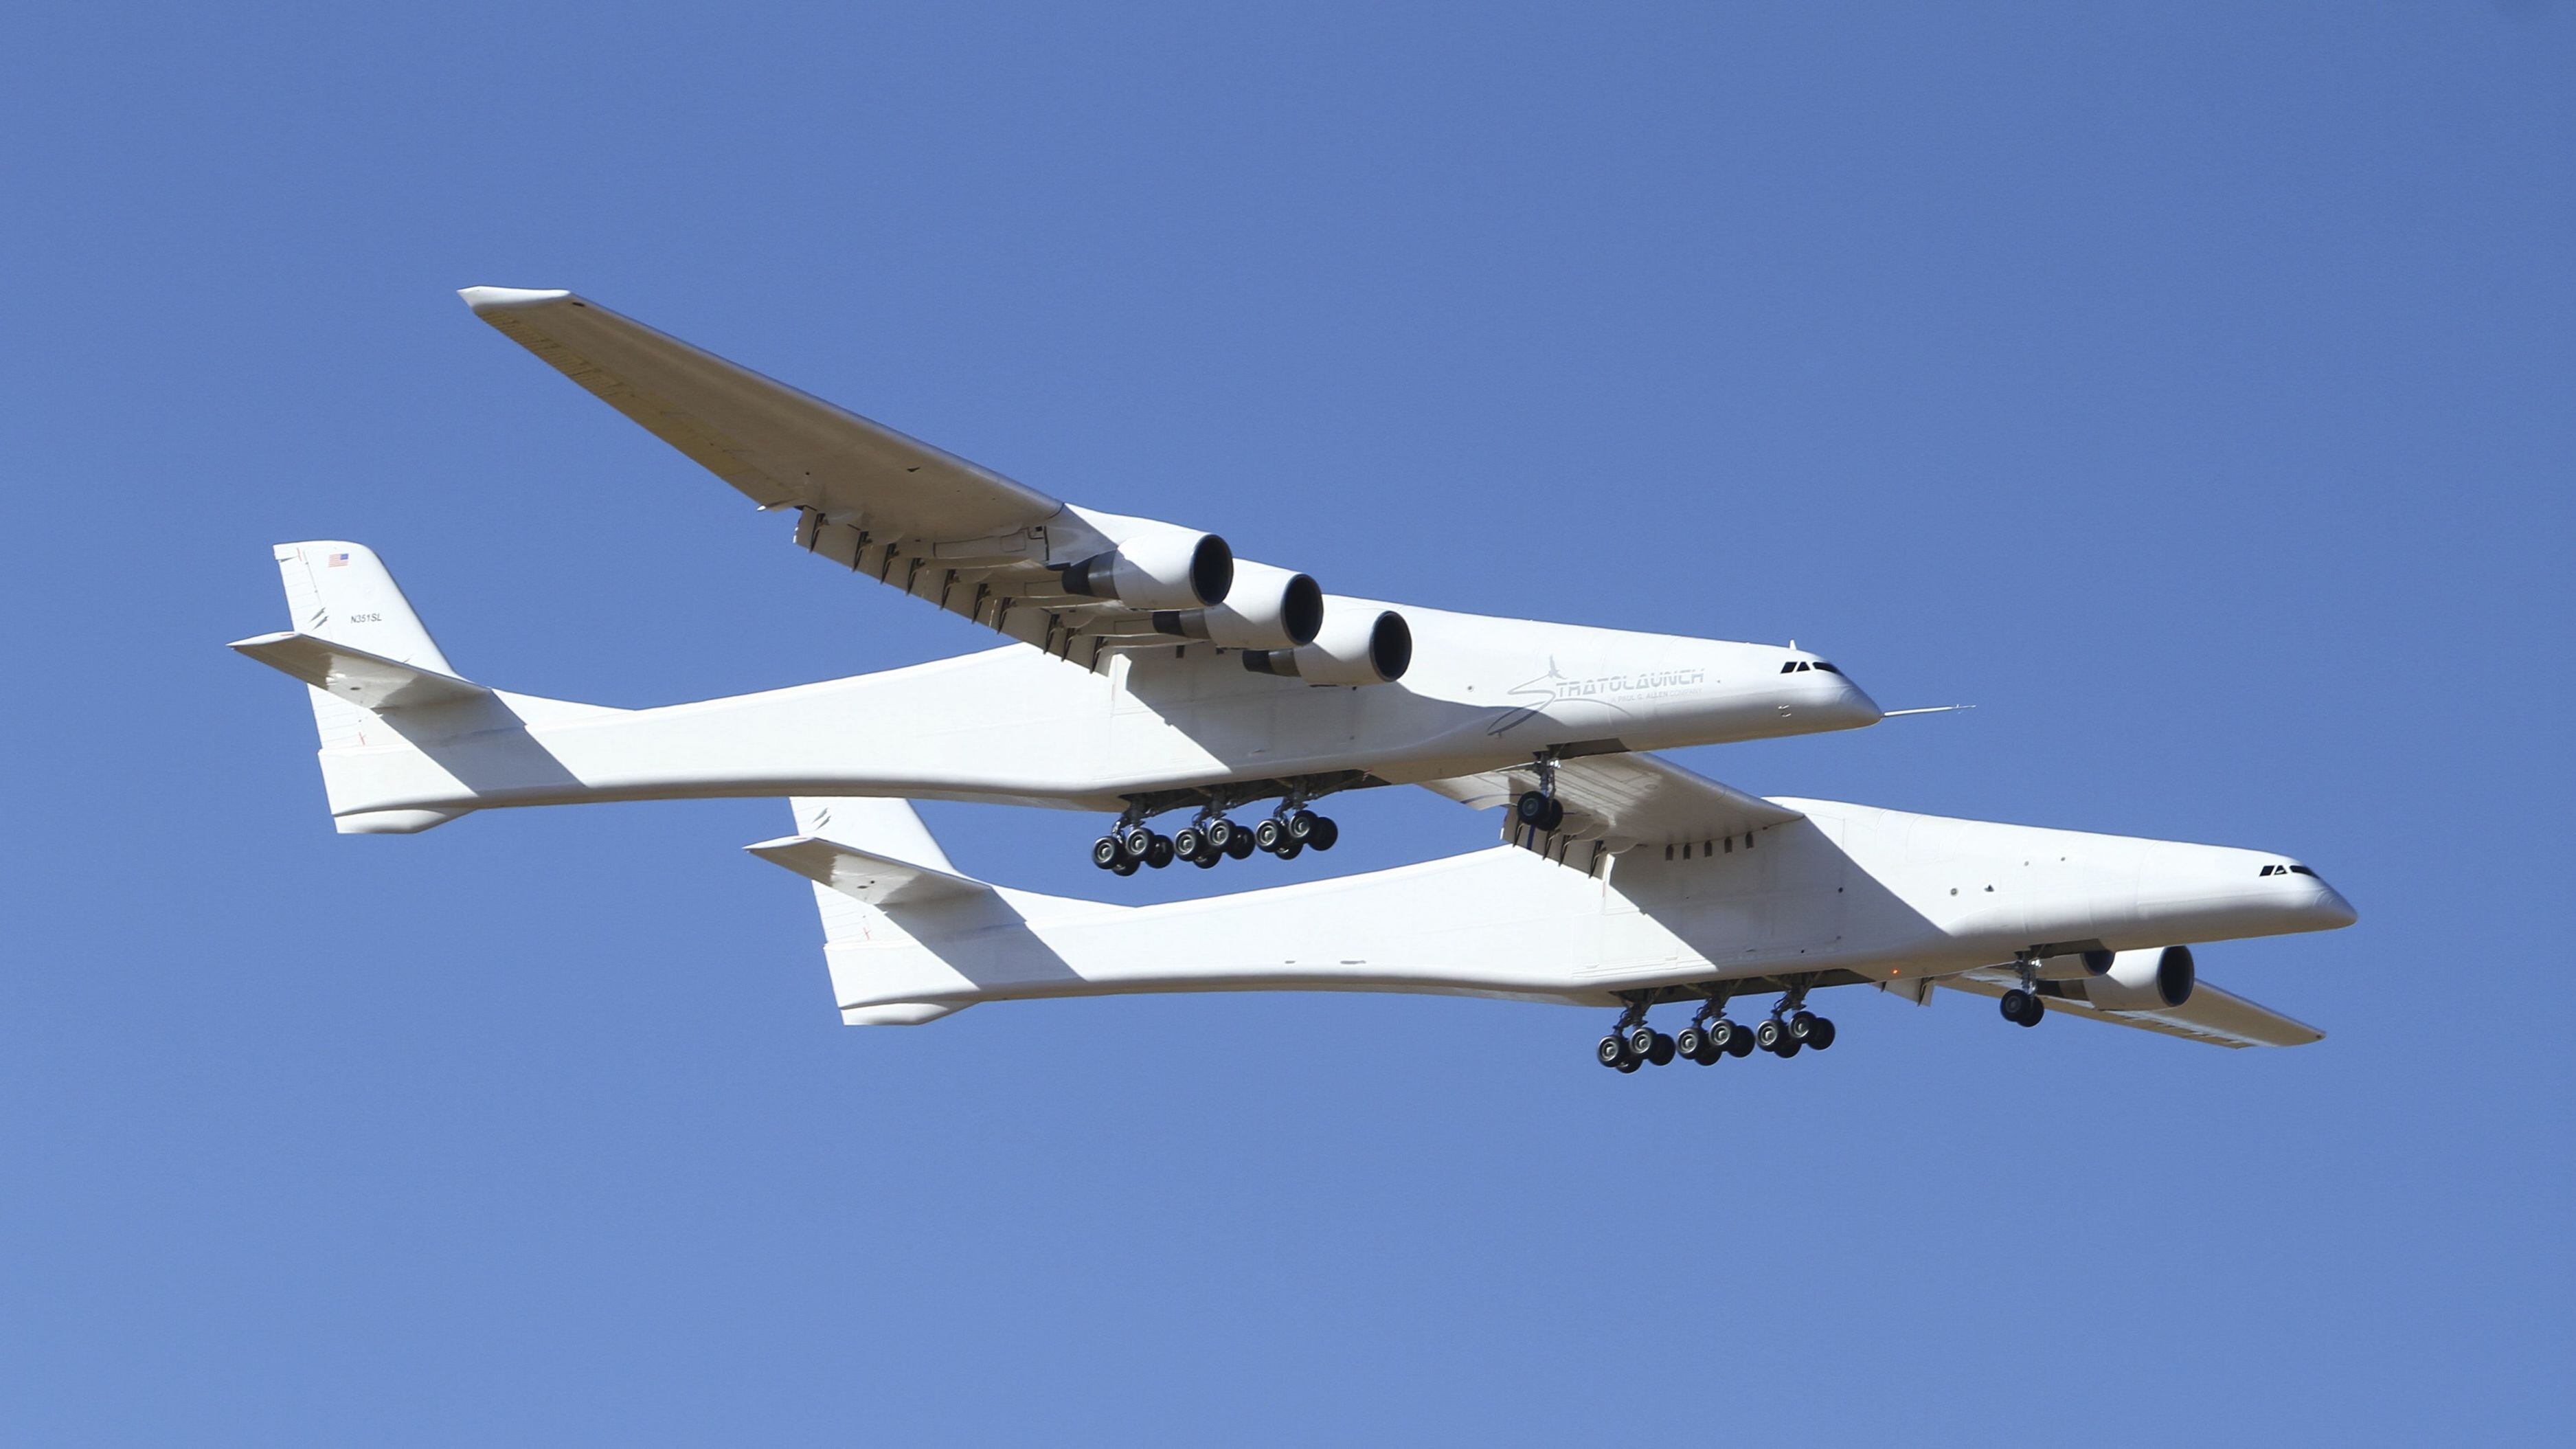 Stratolaunch was established by late Microsoft co-founder Paul Allen.